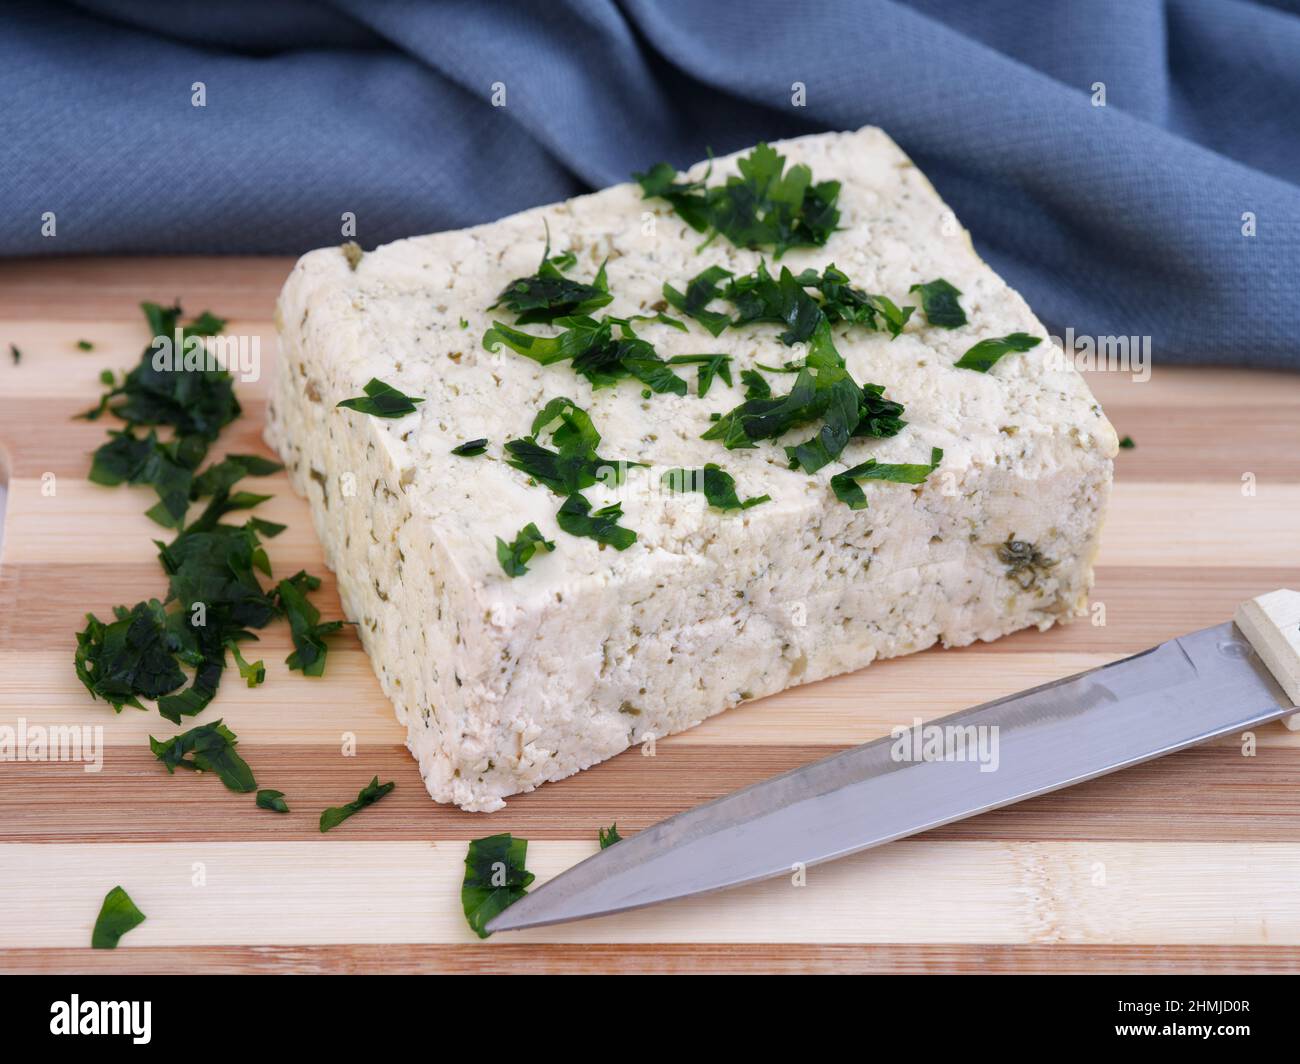 A block of Tofu with some parsley on it lying on a cutting board. Close up. Stock Photo